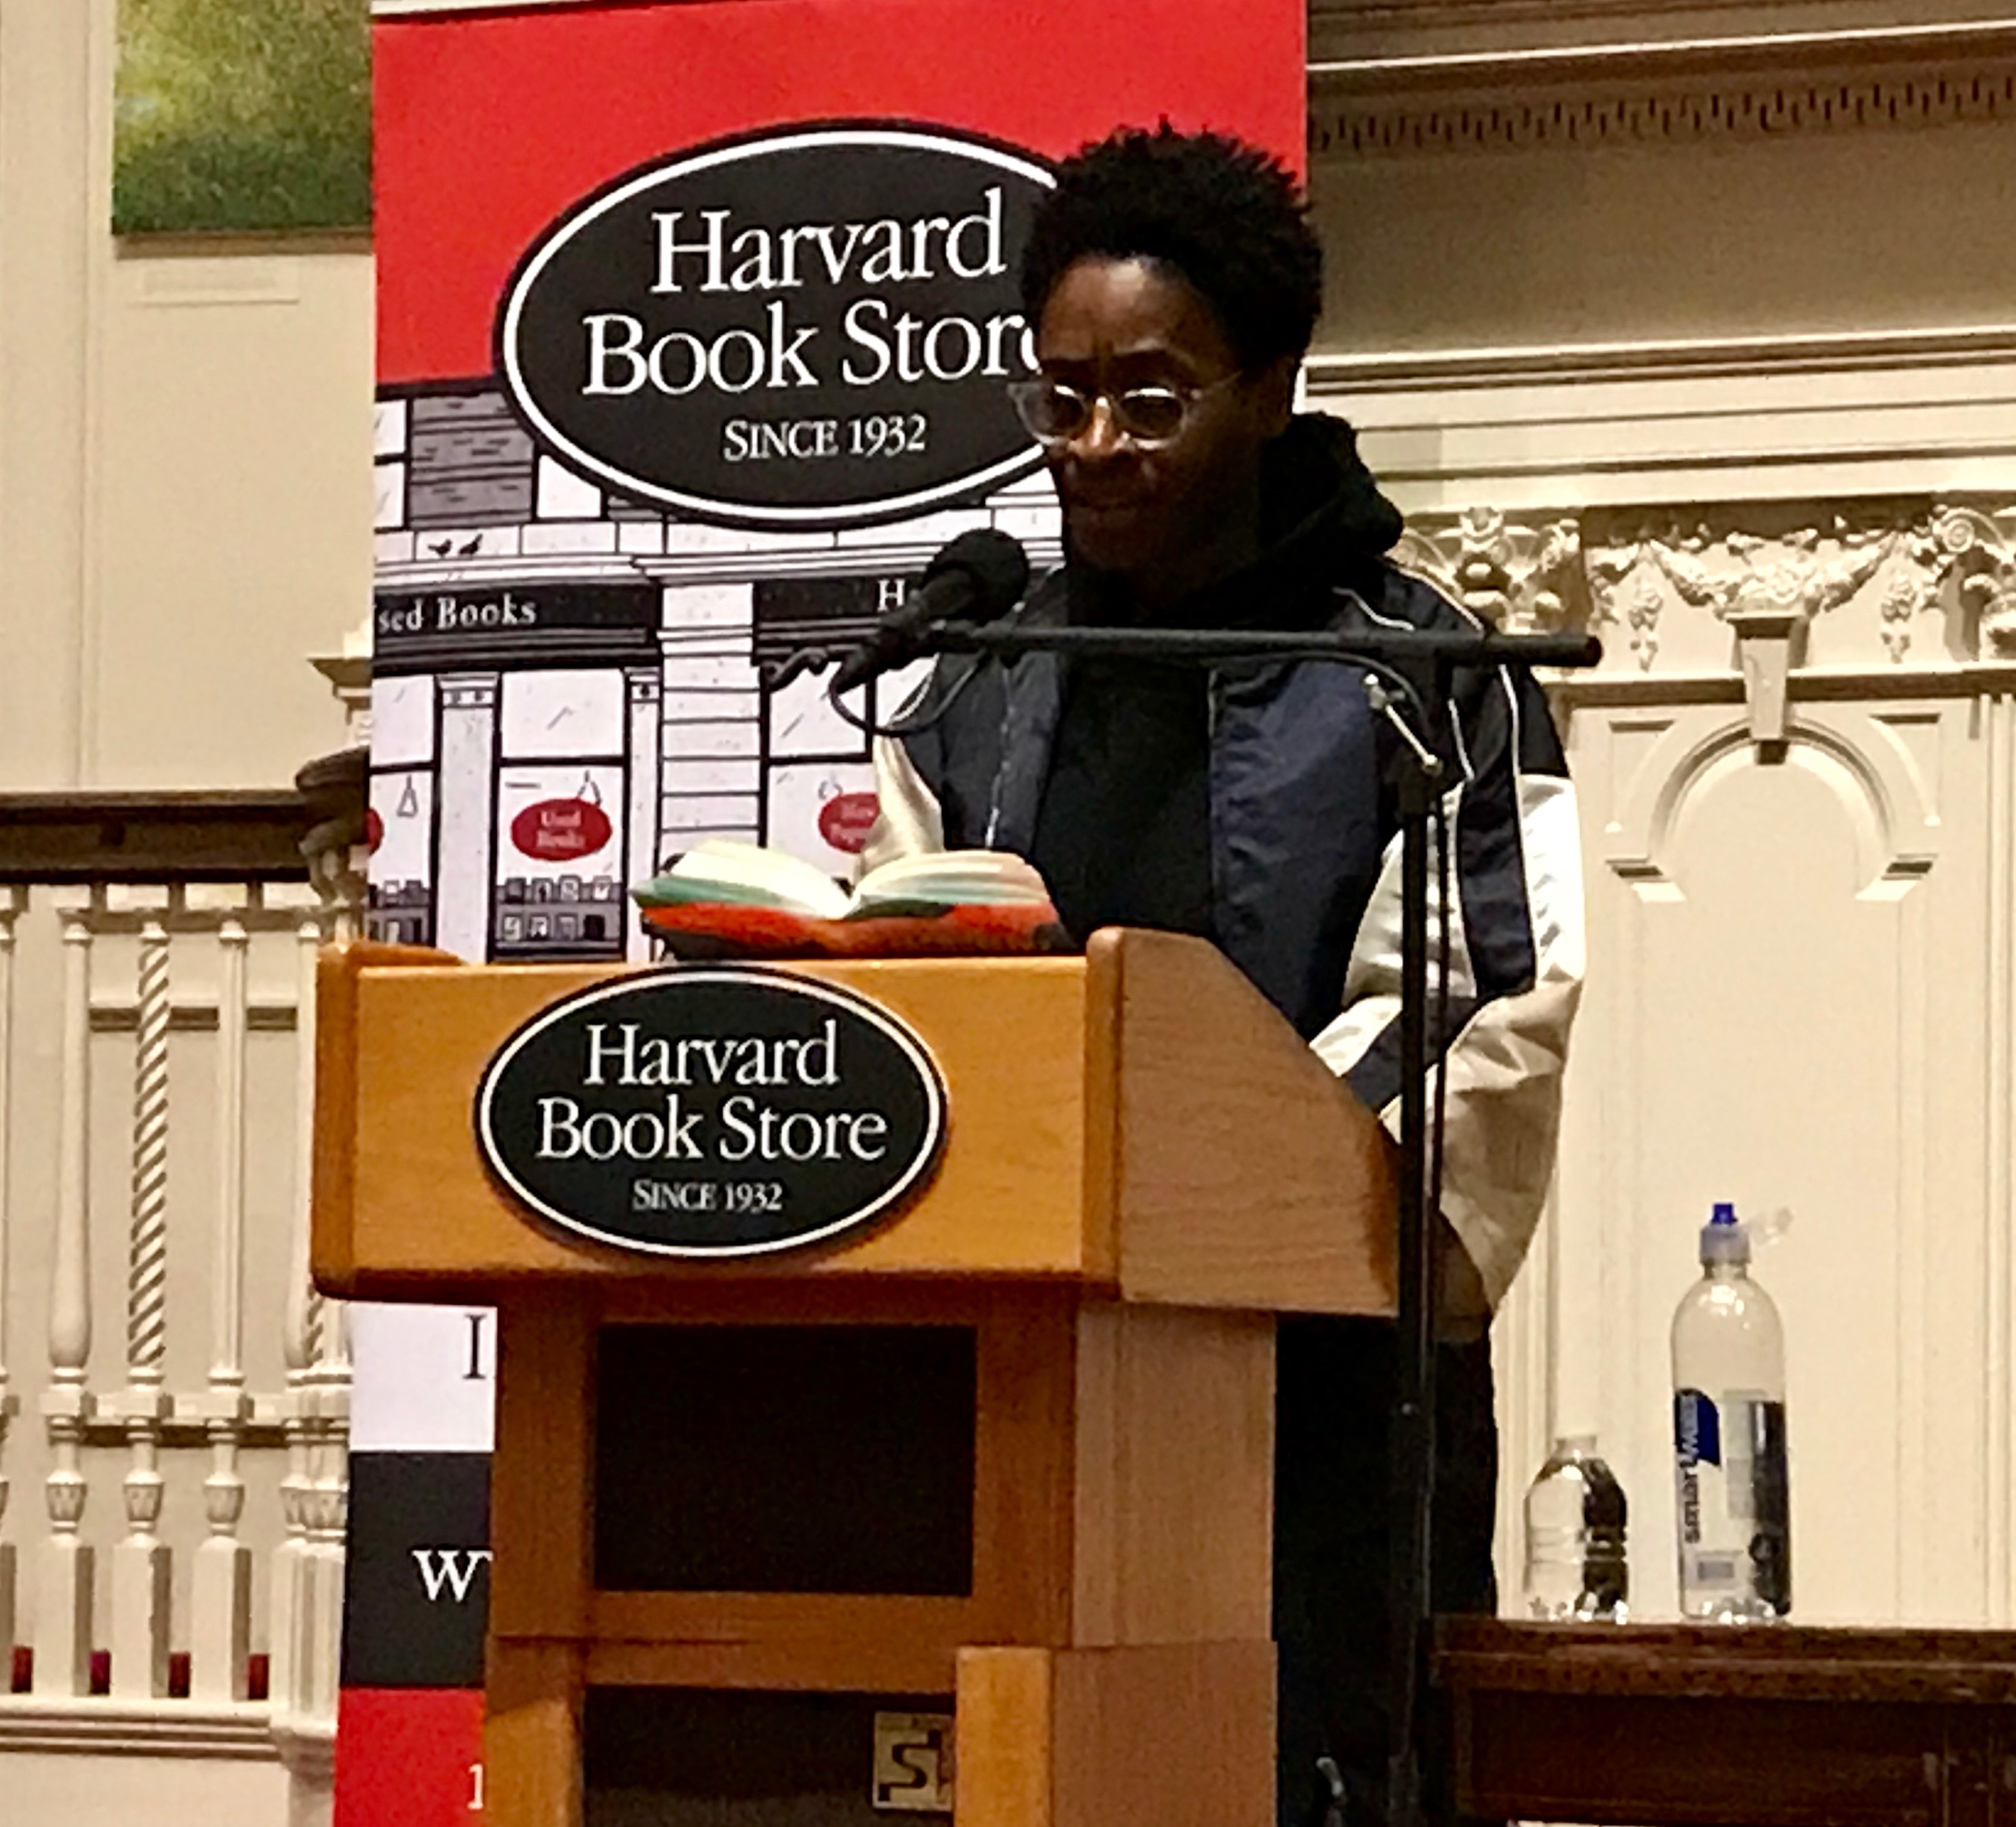 jacqueline woodson red at the bone